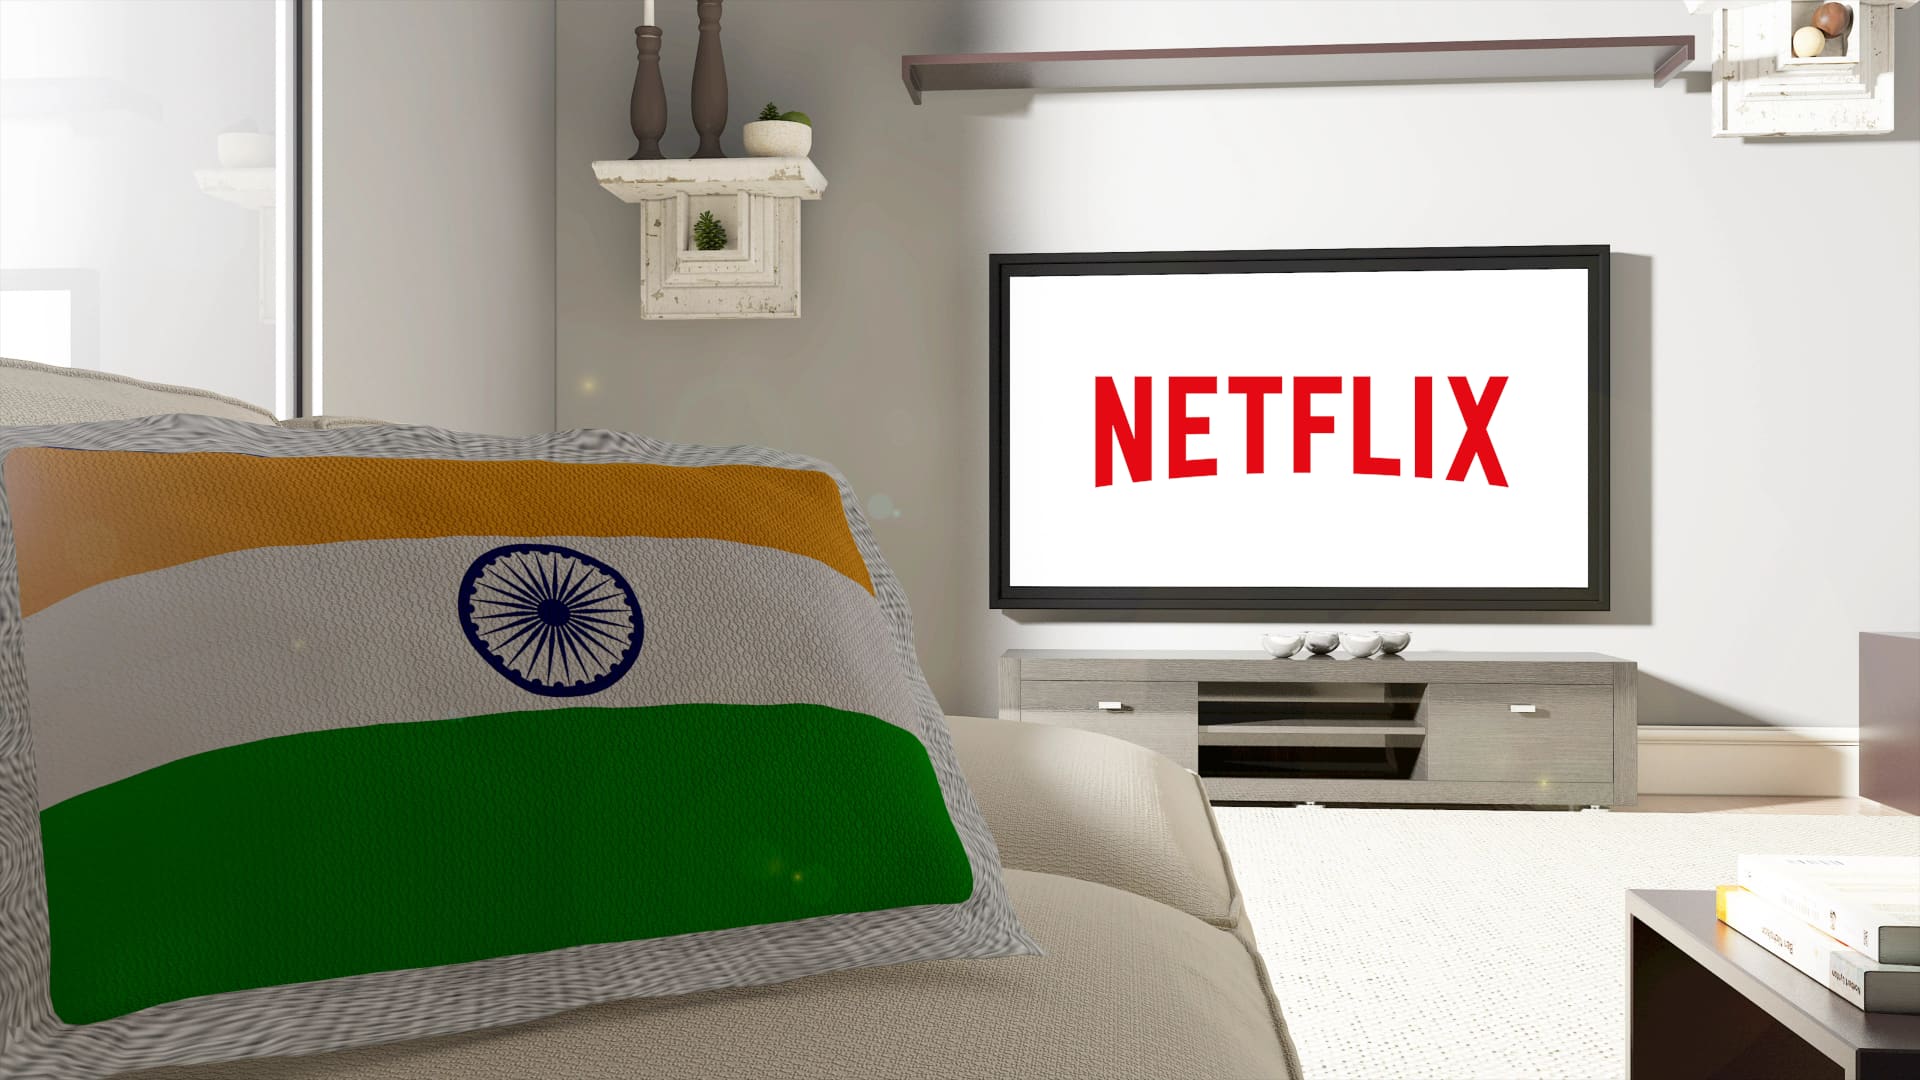 Netflix And Amazon Are Struggling To Win Over Indian Viewers